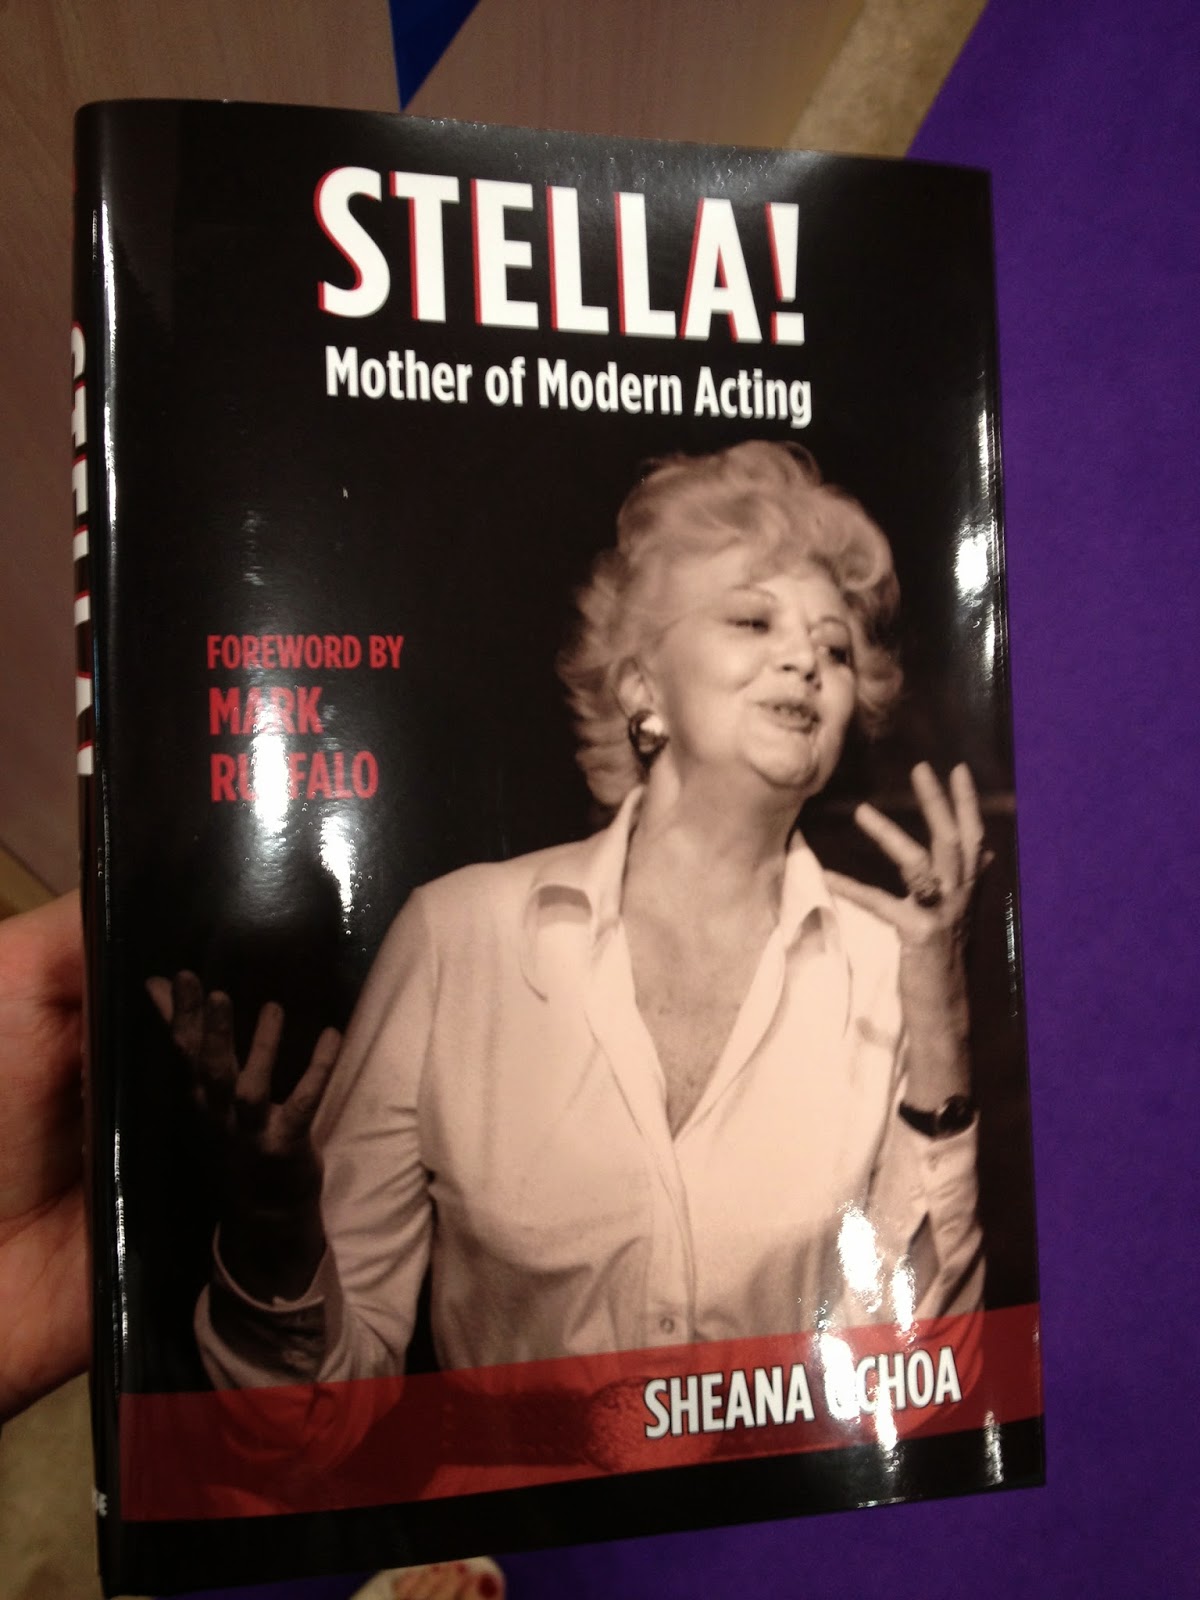 A copy of Stella! Mother of Modern Acting